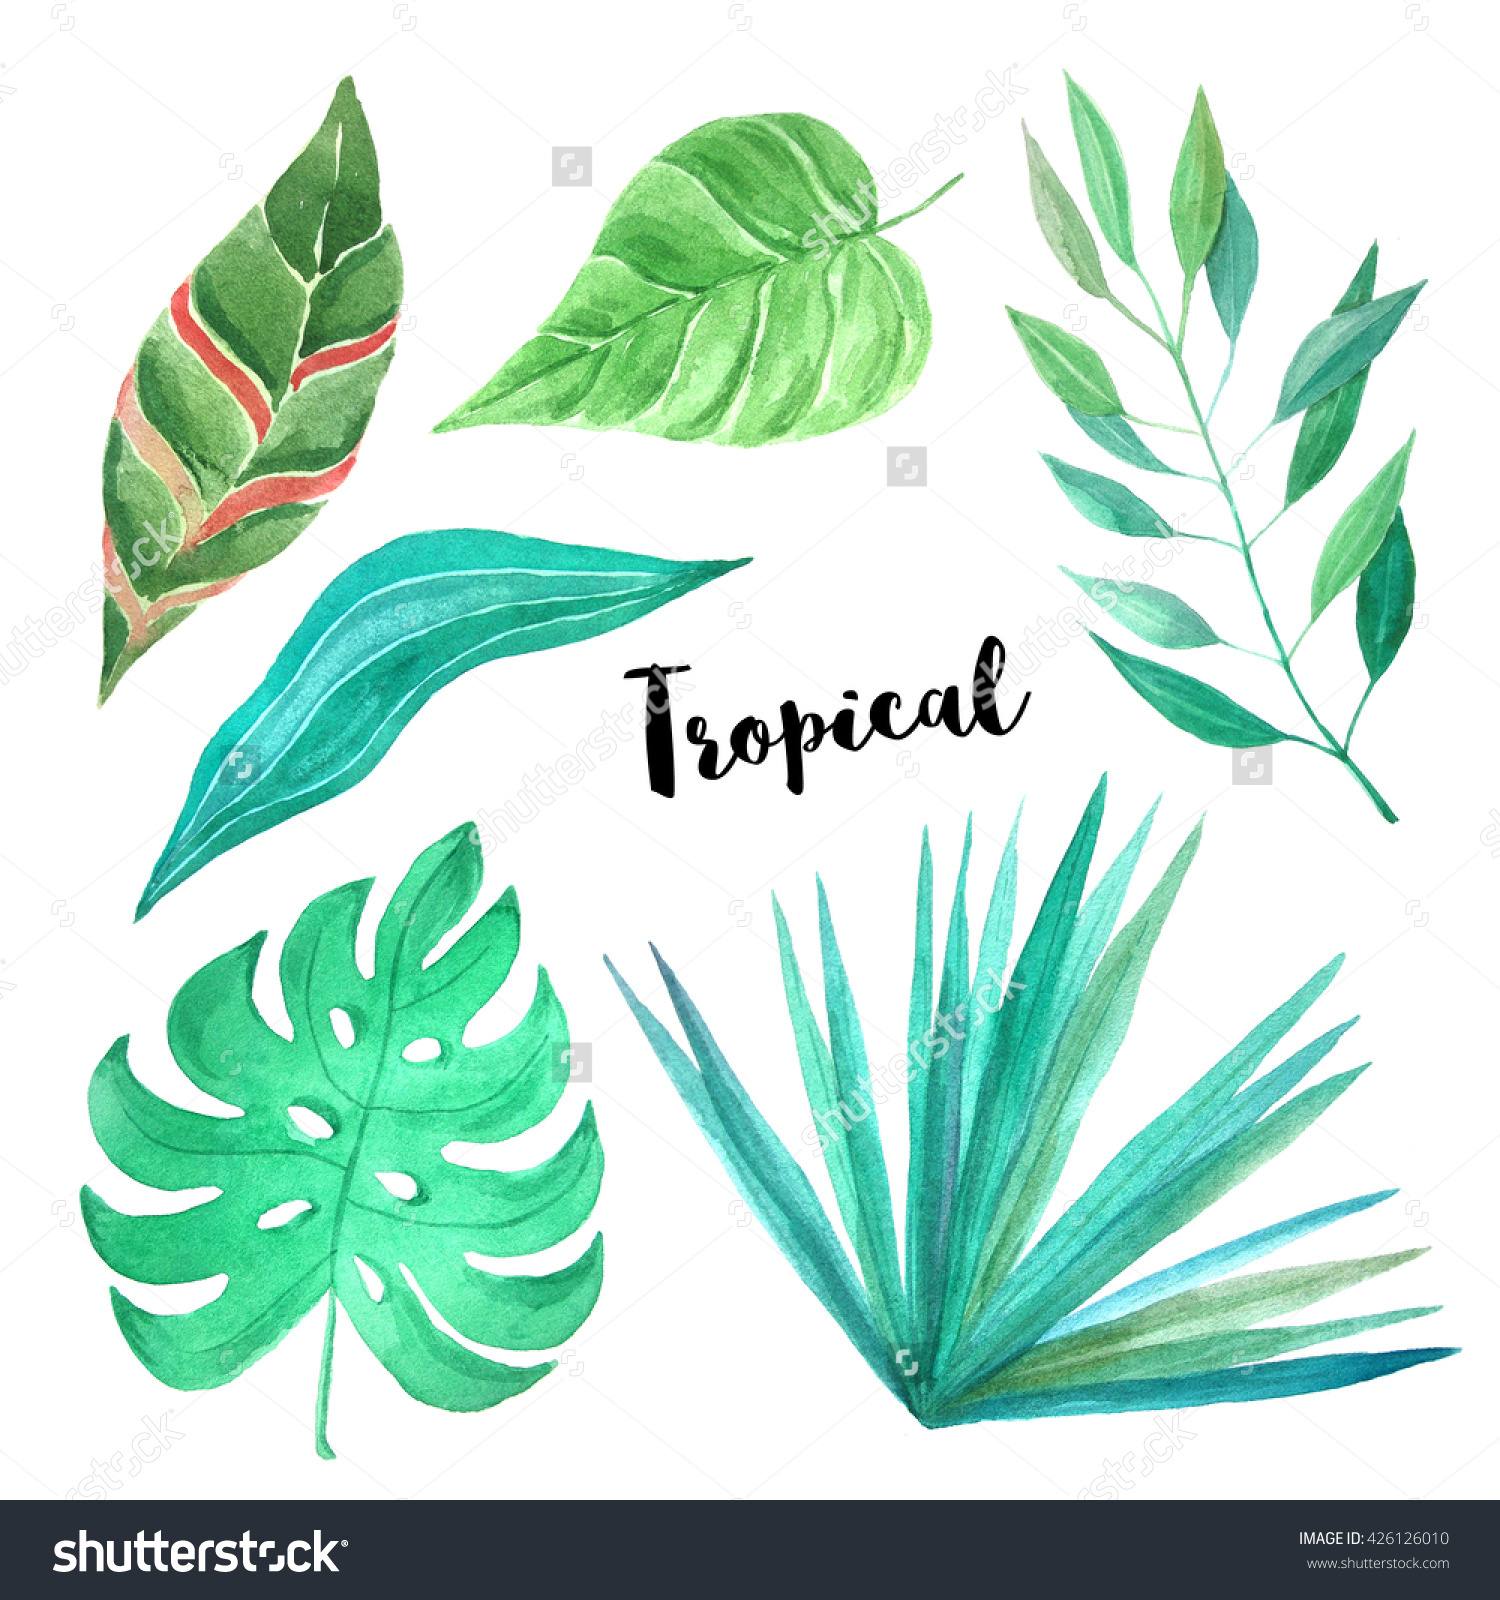 Watercolor Hand Painted Tropical Leaves Plants Stock Illustration.